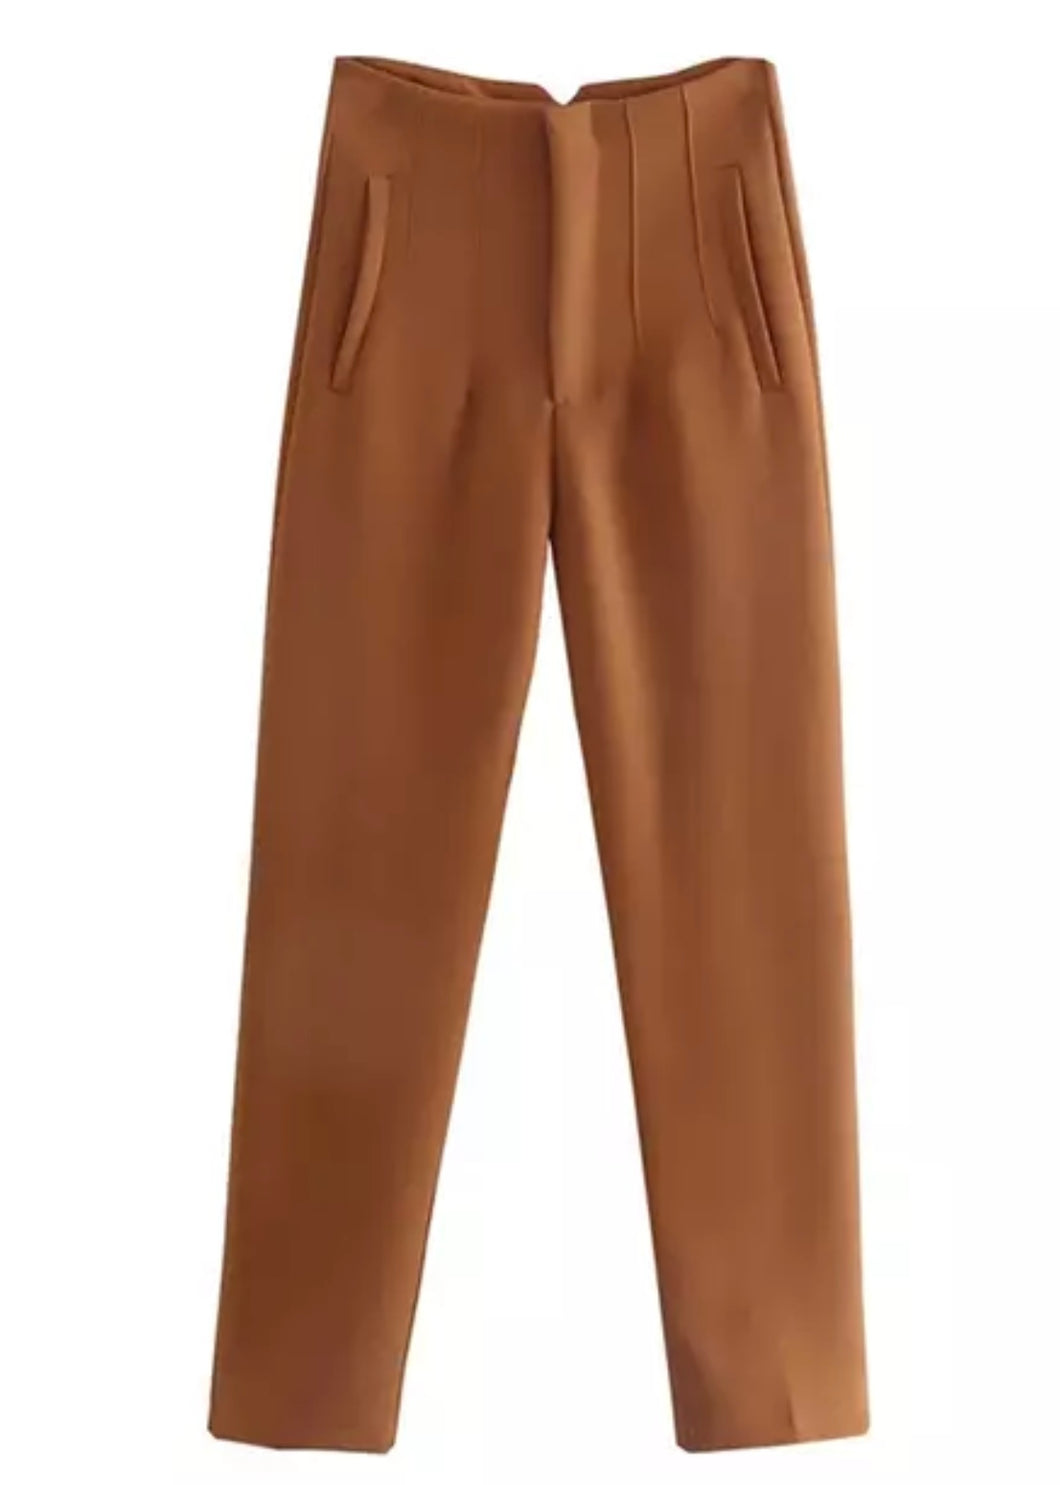 Seoul Tapered High Waisted Trousers - The Style Guide TT